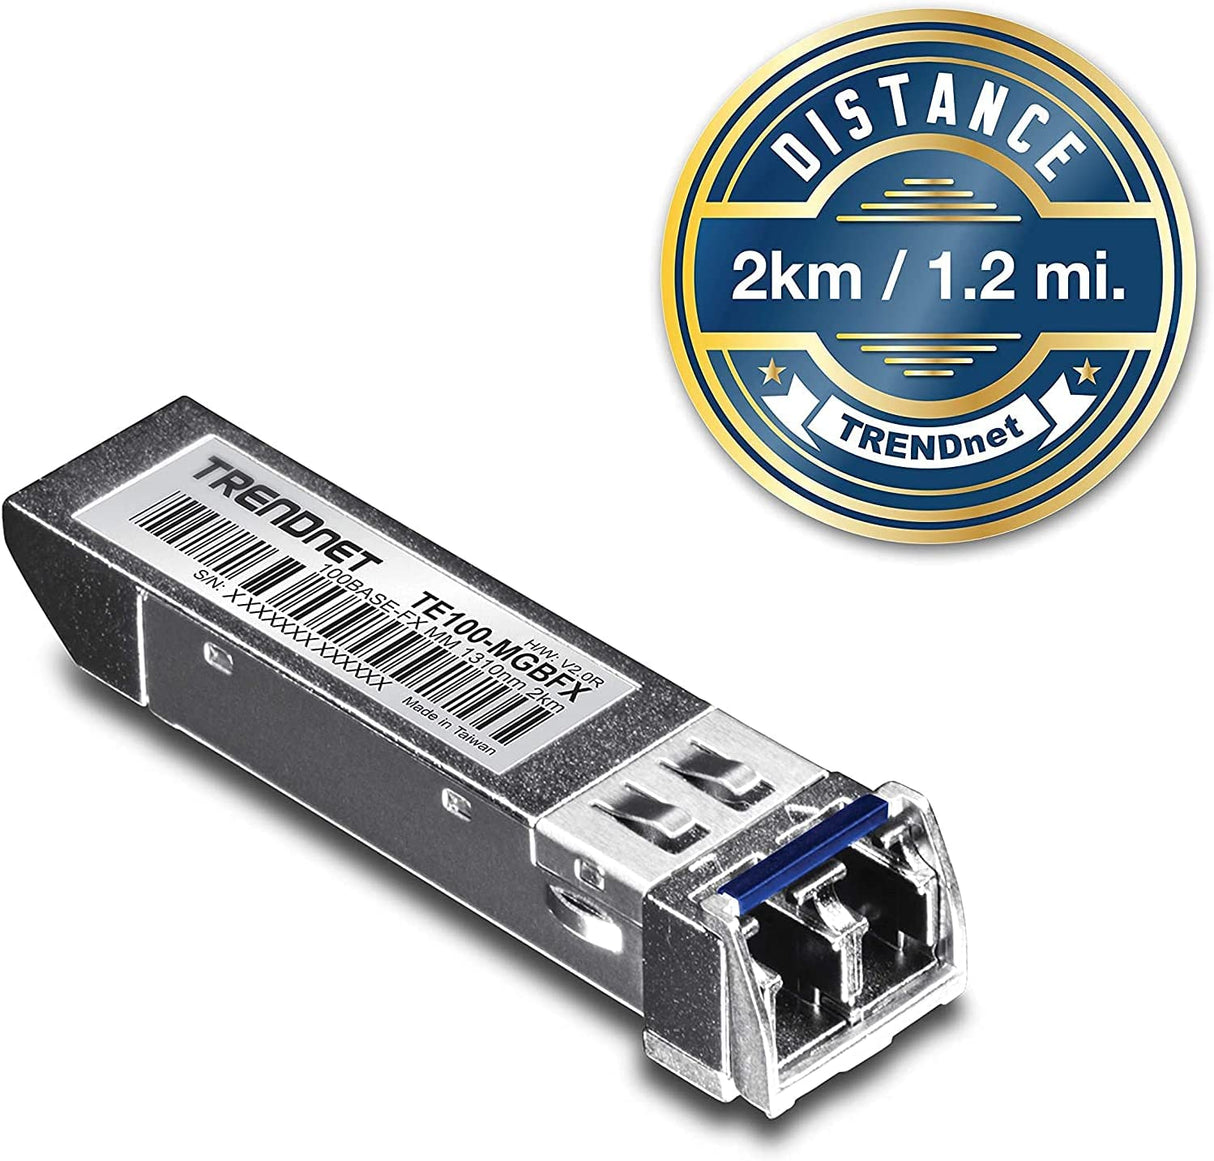 TRENDnet SFP to RJ45 100Base-FX Multi-Mode LC Module, TE100-MGBFX, Compatible with Mini-GBIC, Supports 1310 nm, Up to 155 Mbps, Hot-Pluggable, Up to 2 Km (1.2 Miles), Lifetime Protection